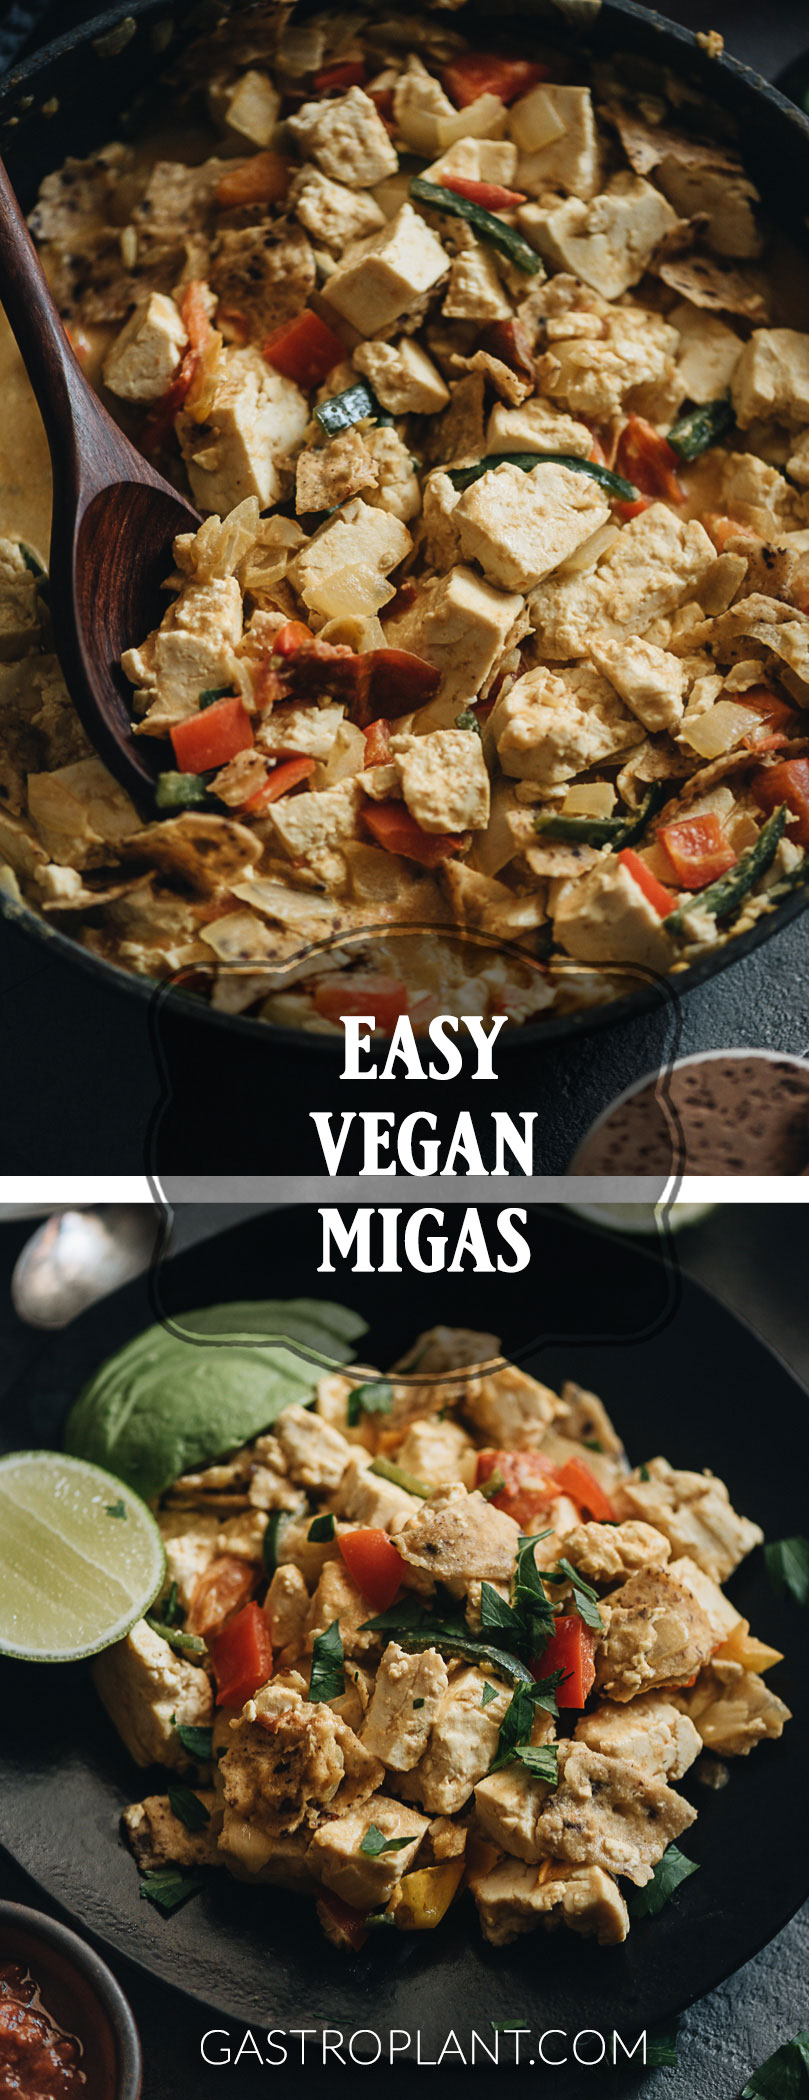 Vegan migas collage with text